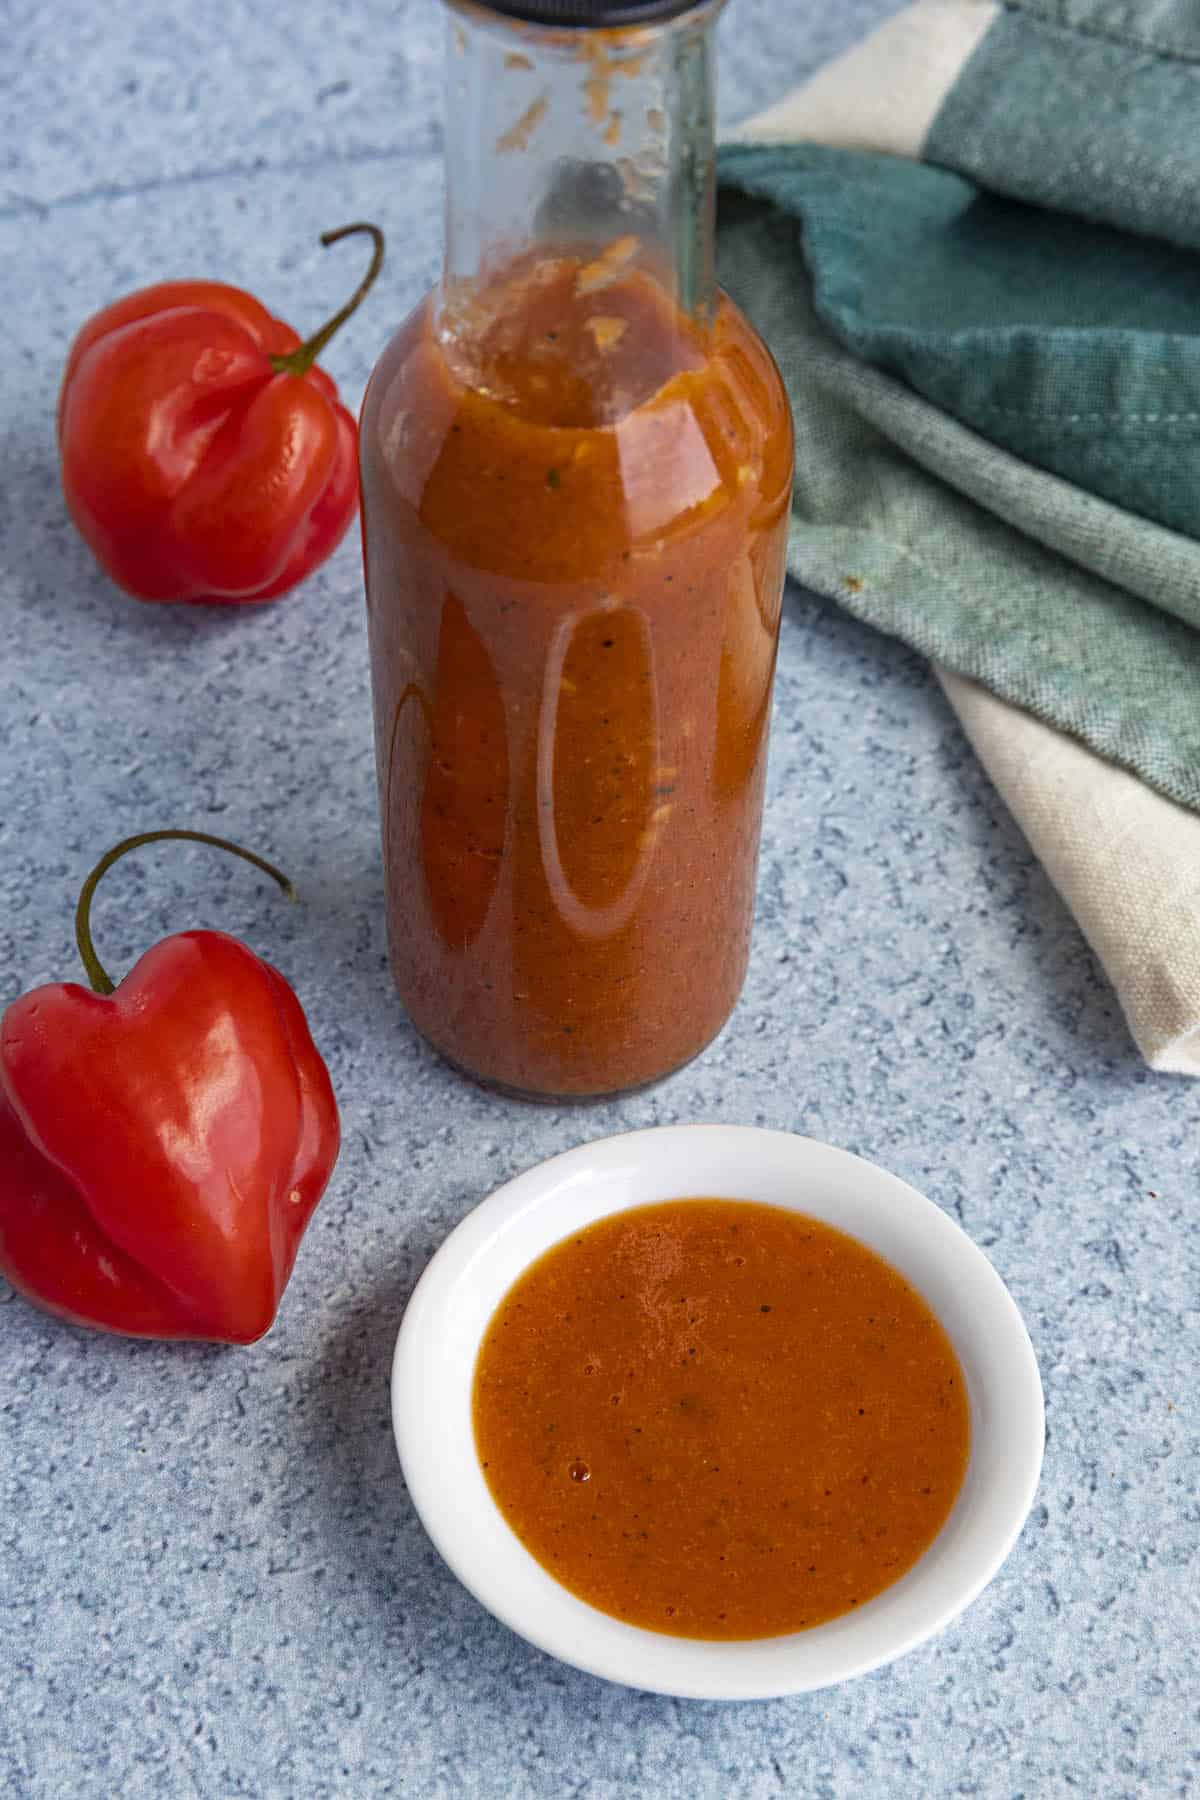 Habanero Hot Sauce in a bowl and a bottle